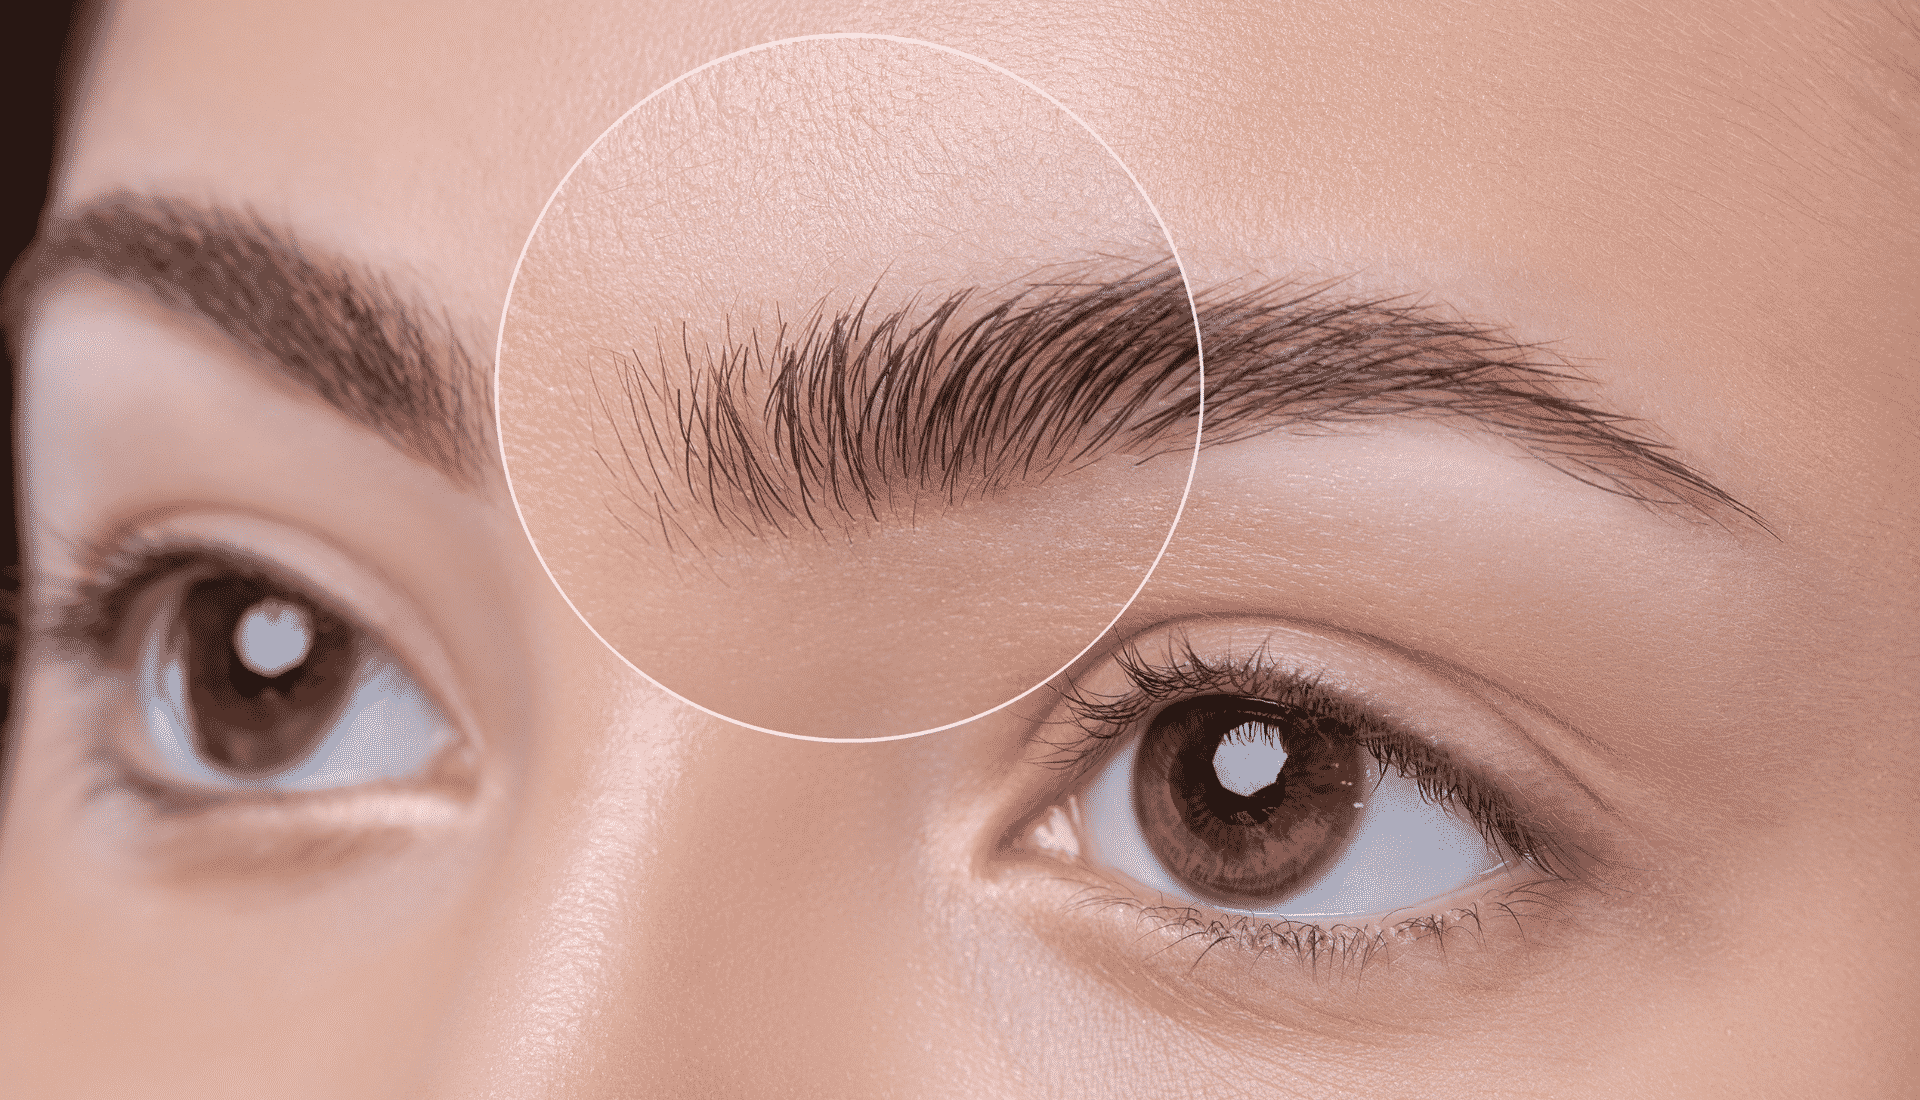 microblading removal in montreal and laval quebec